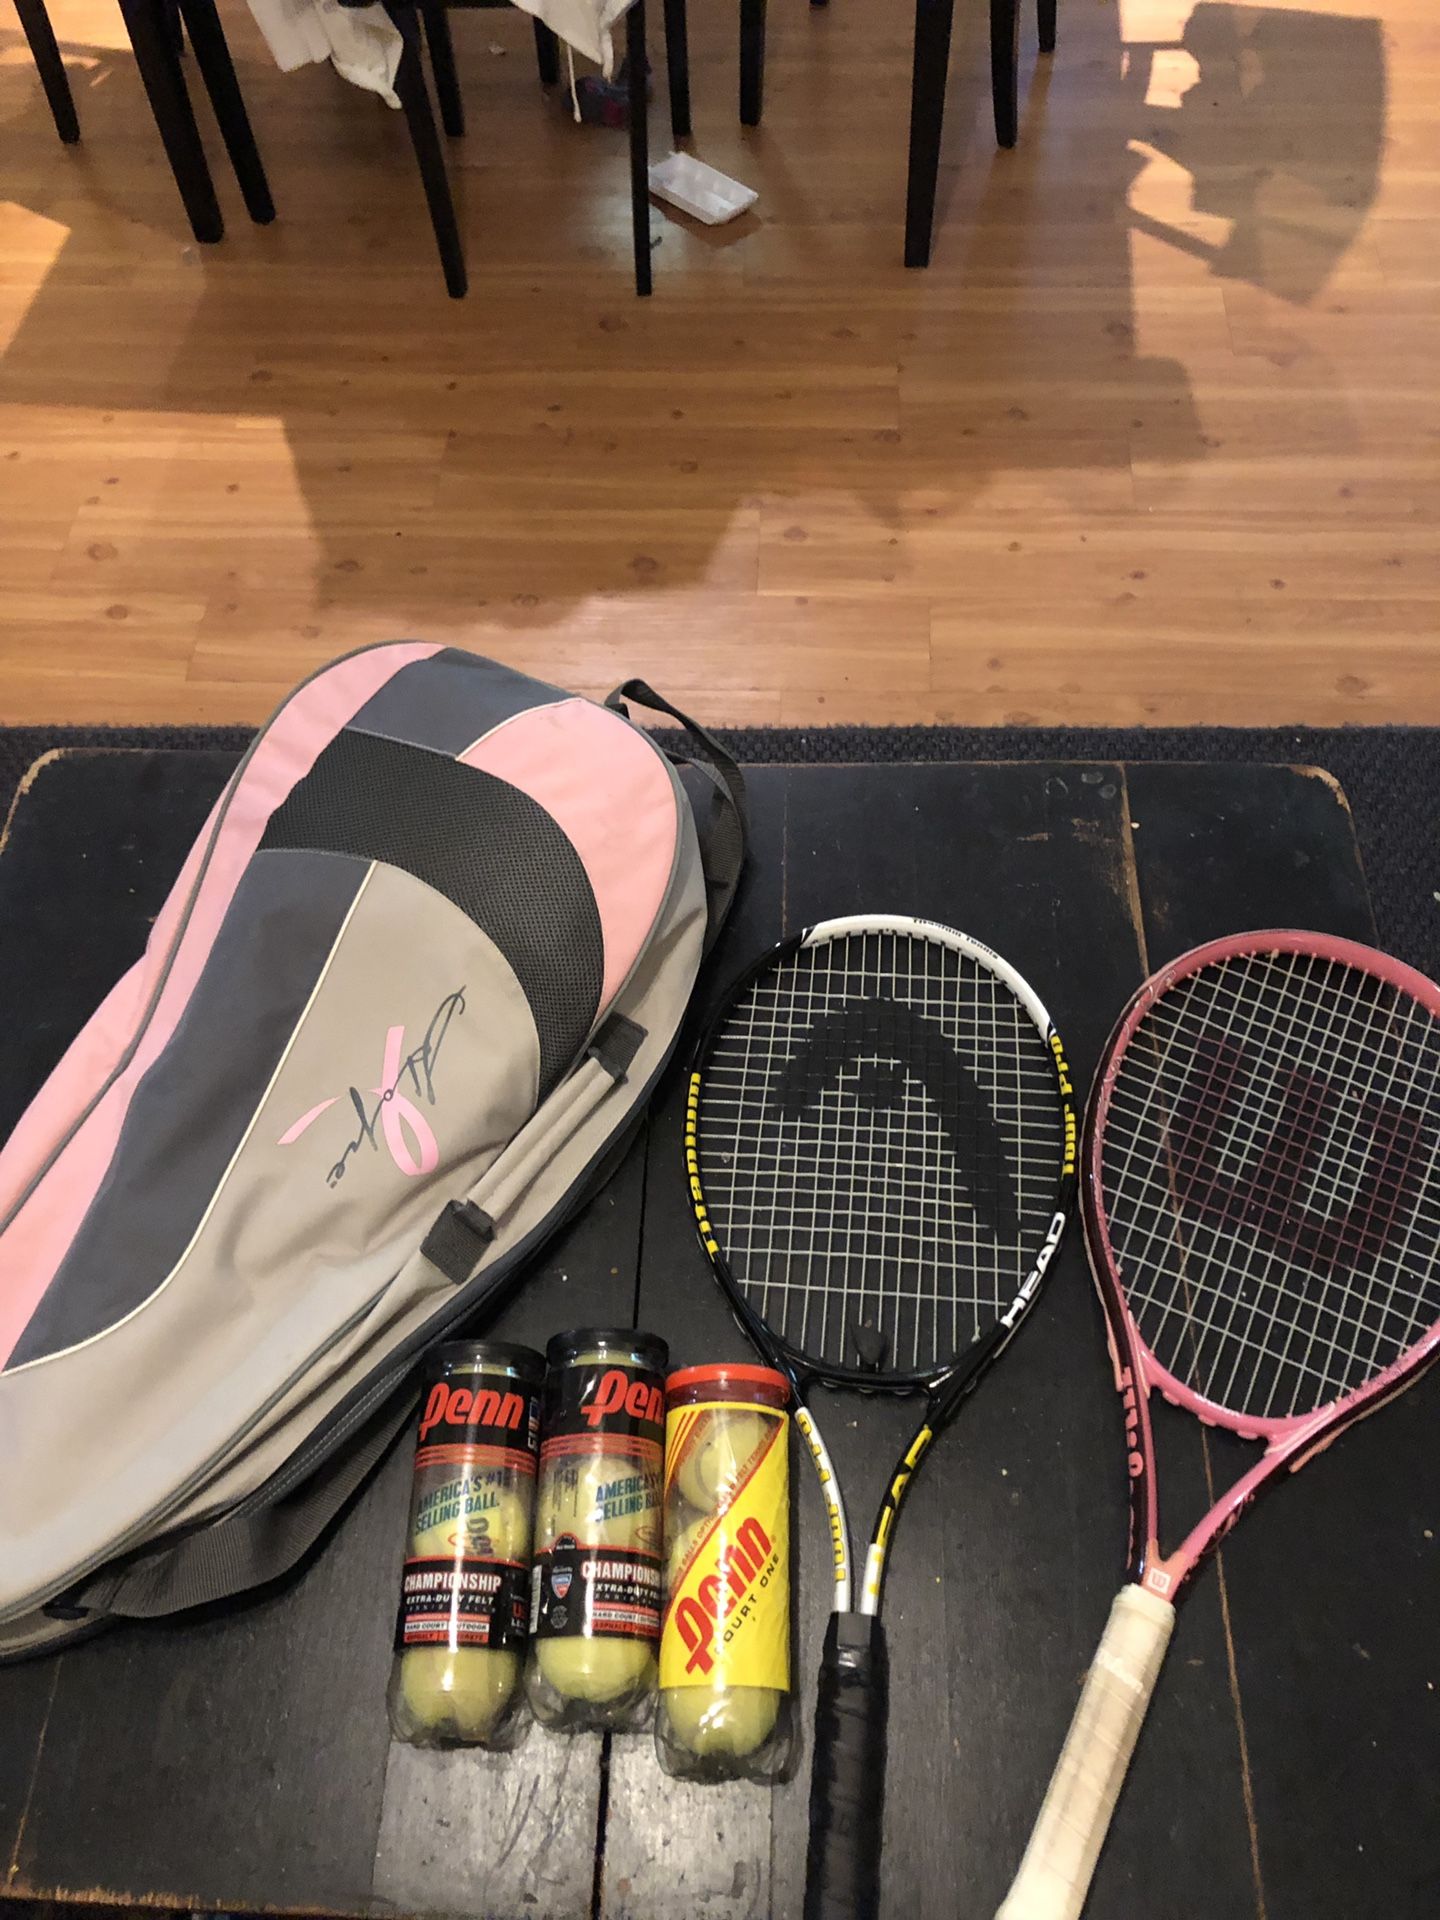 2 Tennis rackets, 3 sets of balls and new case